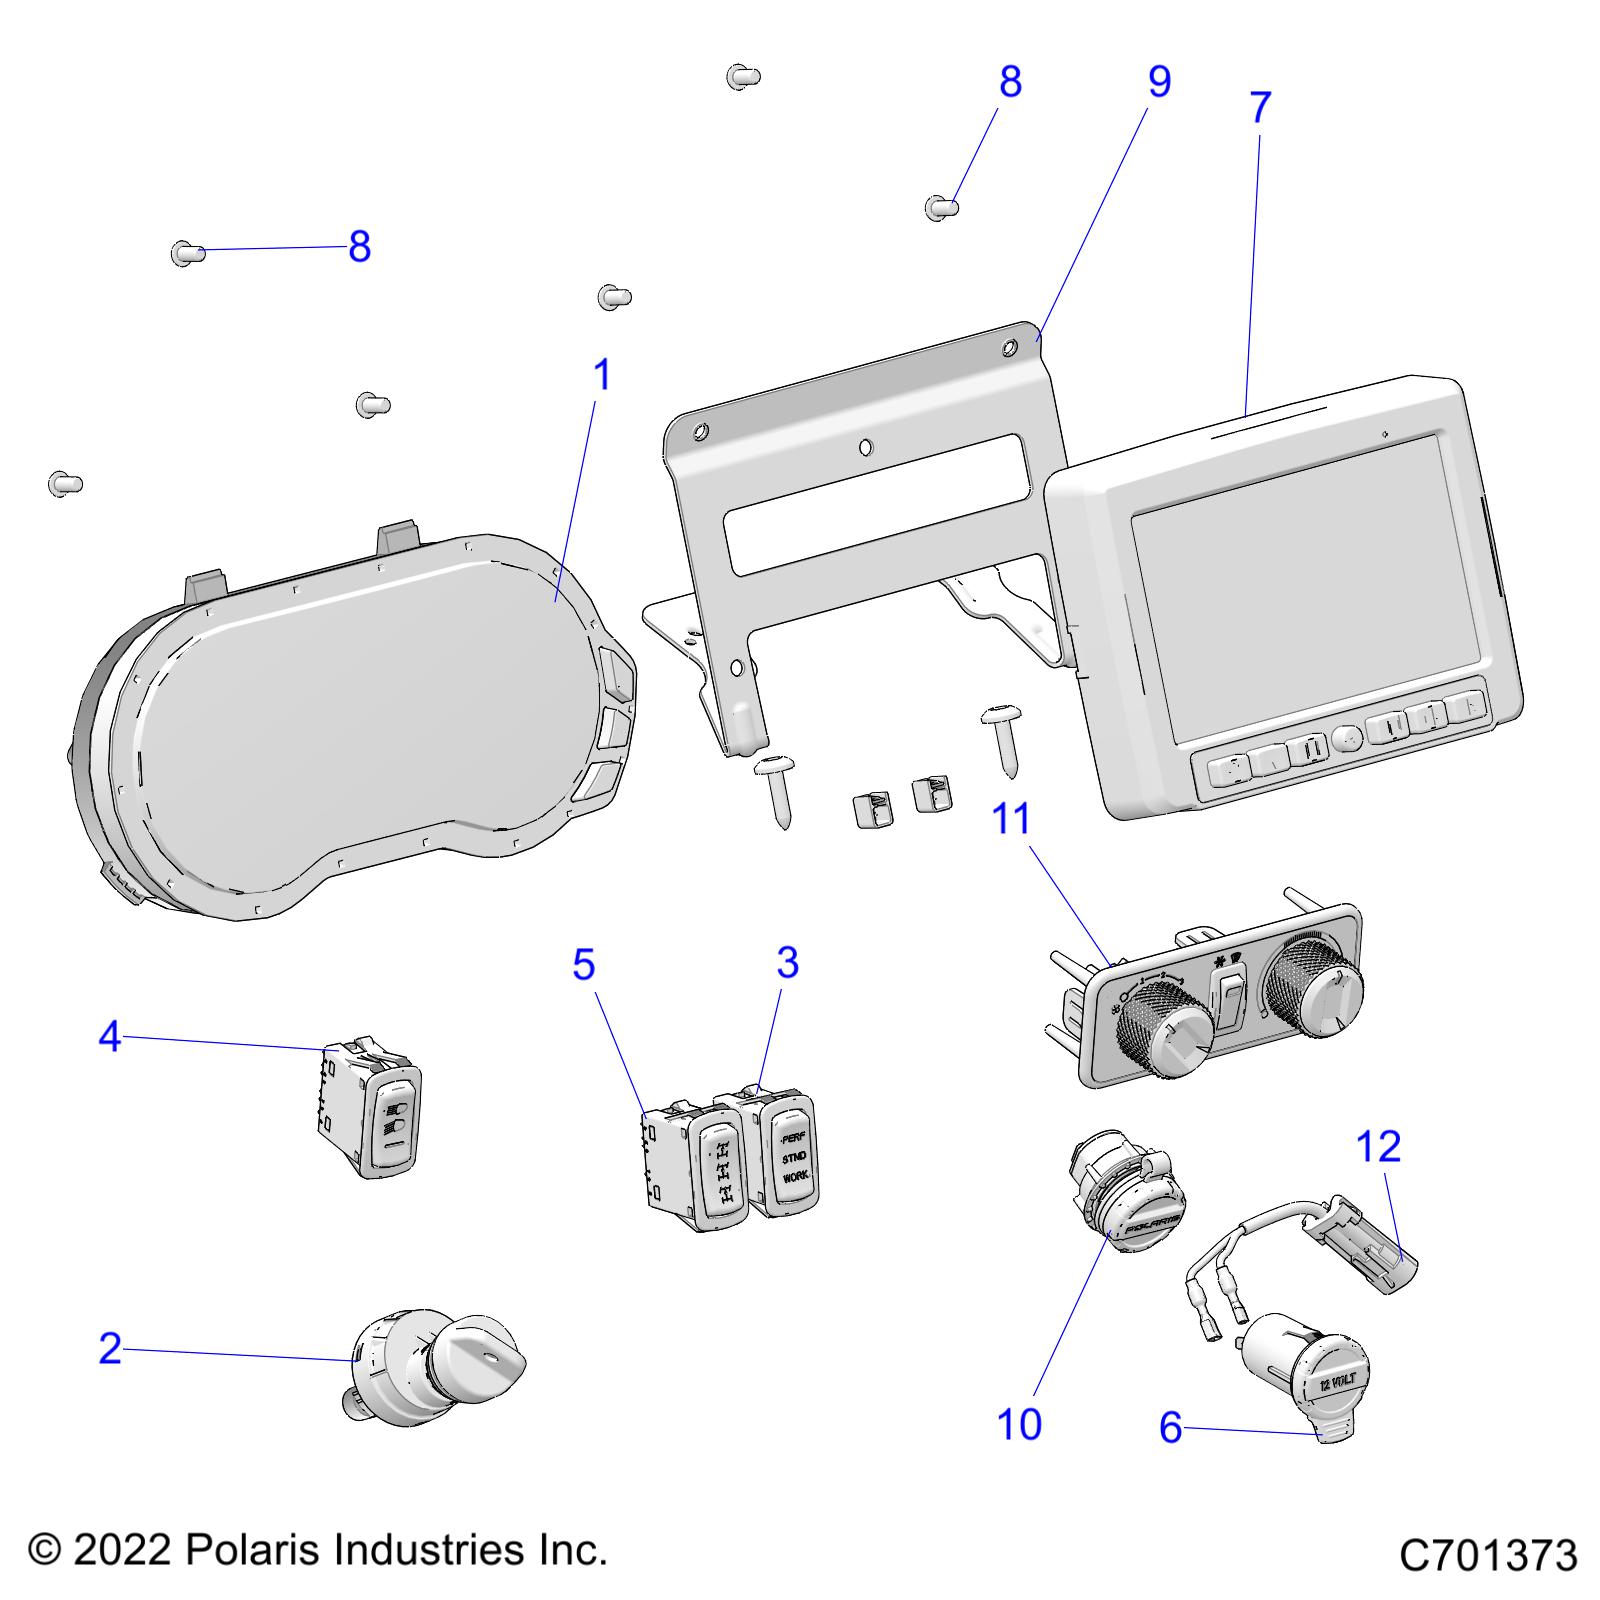 Part Number : 4080274-01 SWITCH-HEADLIGHT